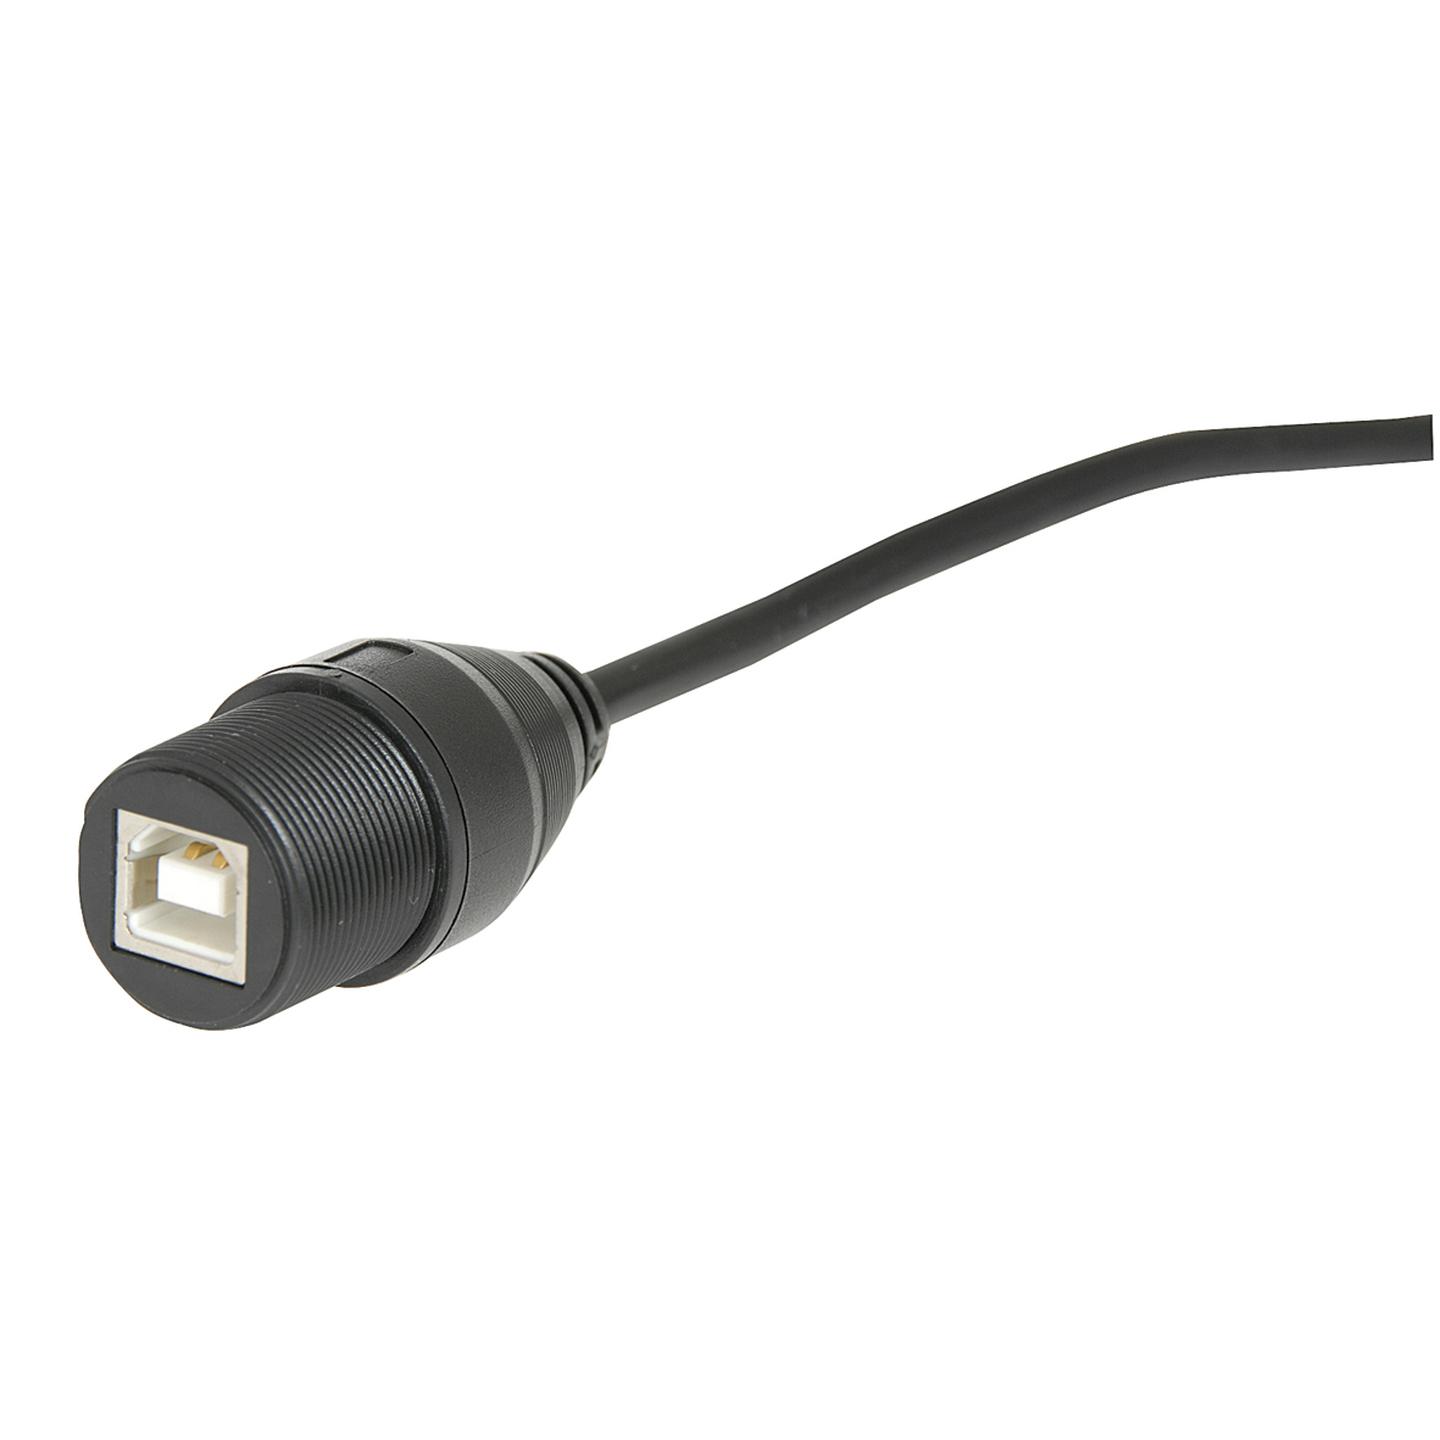 IP67 Rated Type B USB Plug Cable 1m